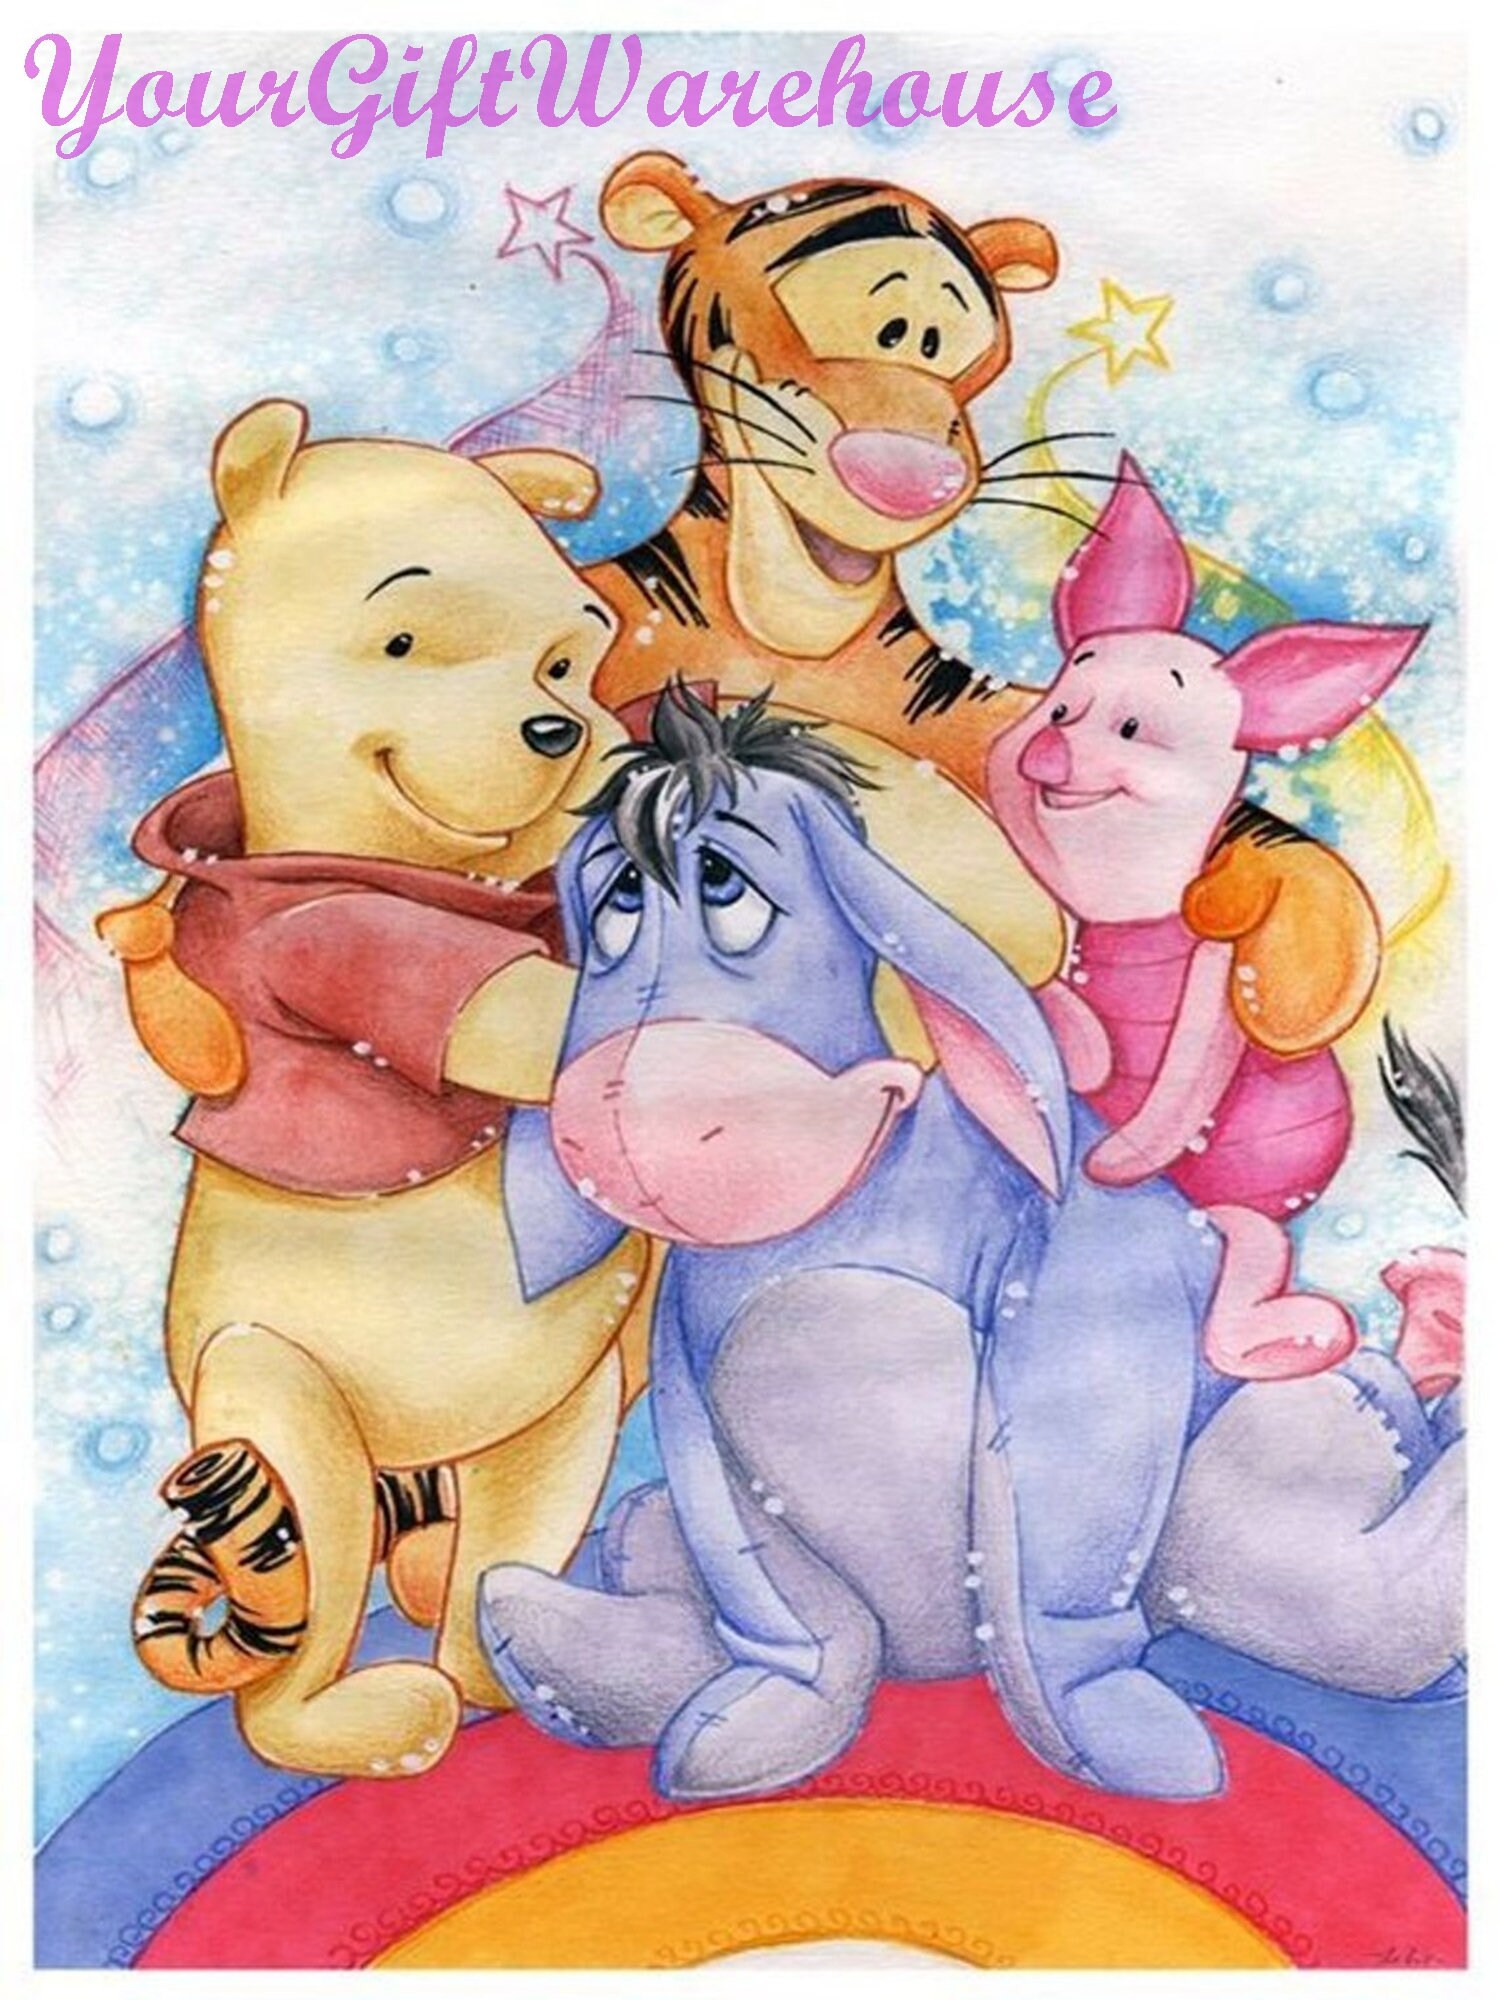 Winnie The Pooh And Friends Party 40*60cm(canvas) full round drill diamond  painting